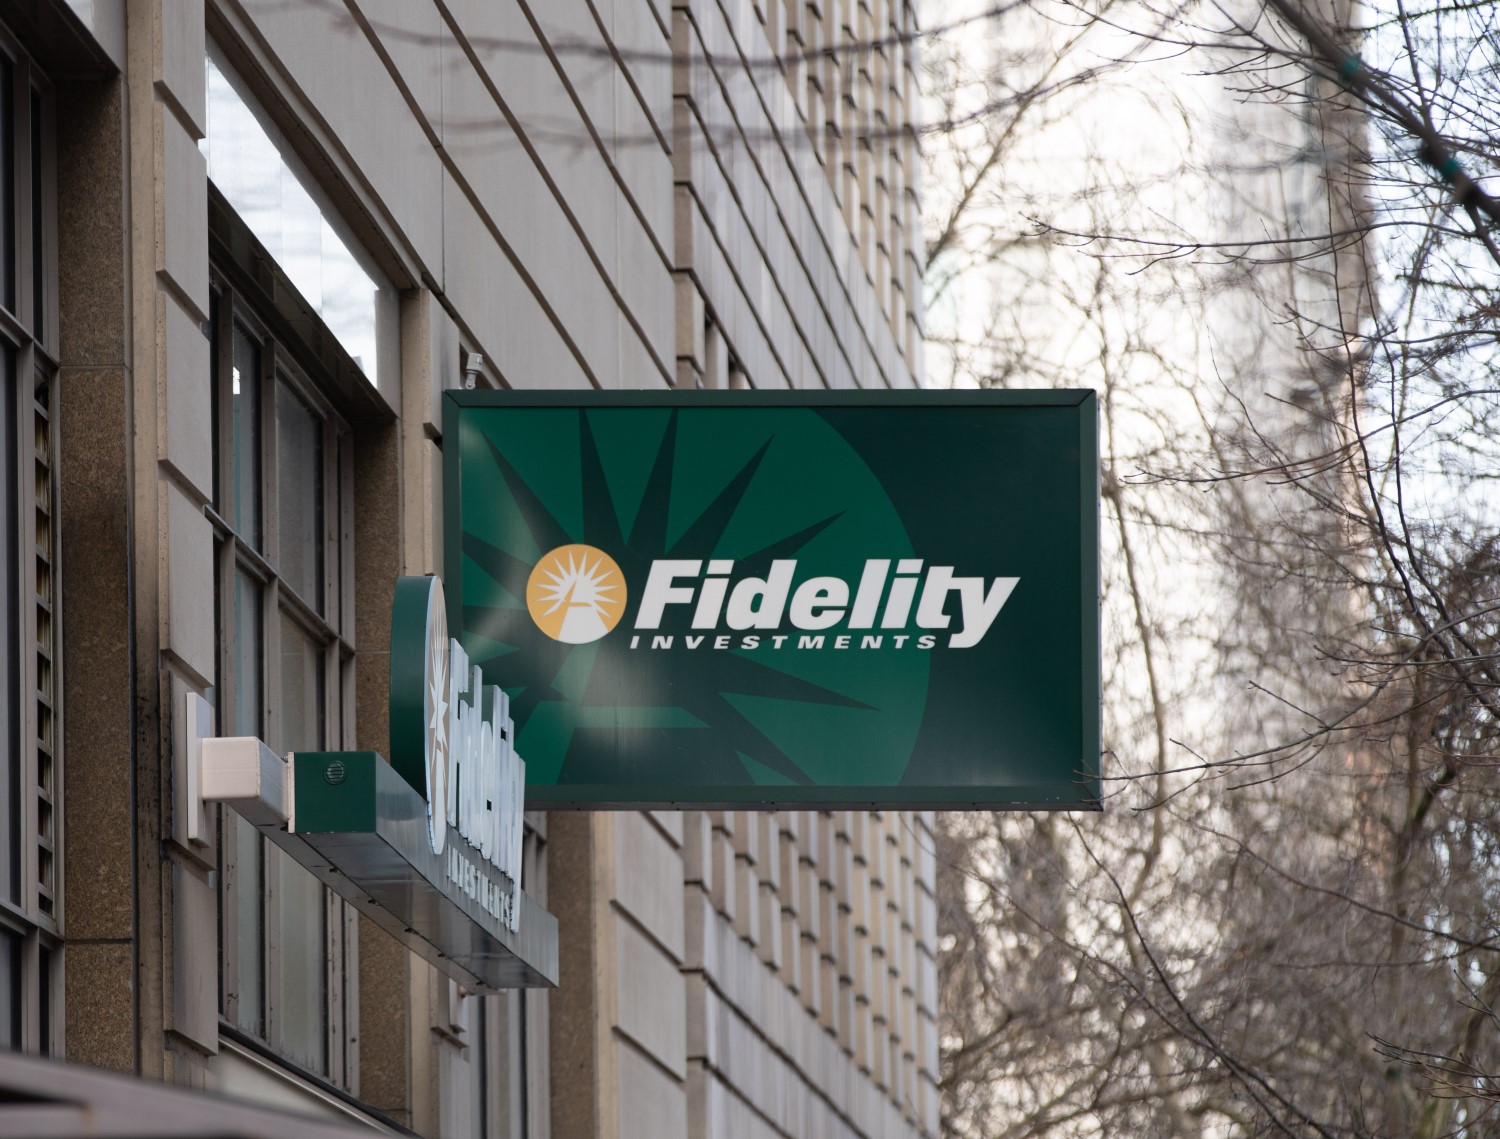 Fidelity Digital Assets Is Hiring 10 More Blockchain And Trading Experts